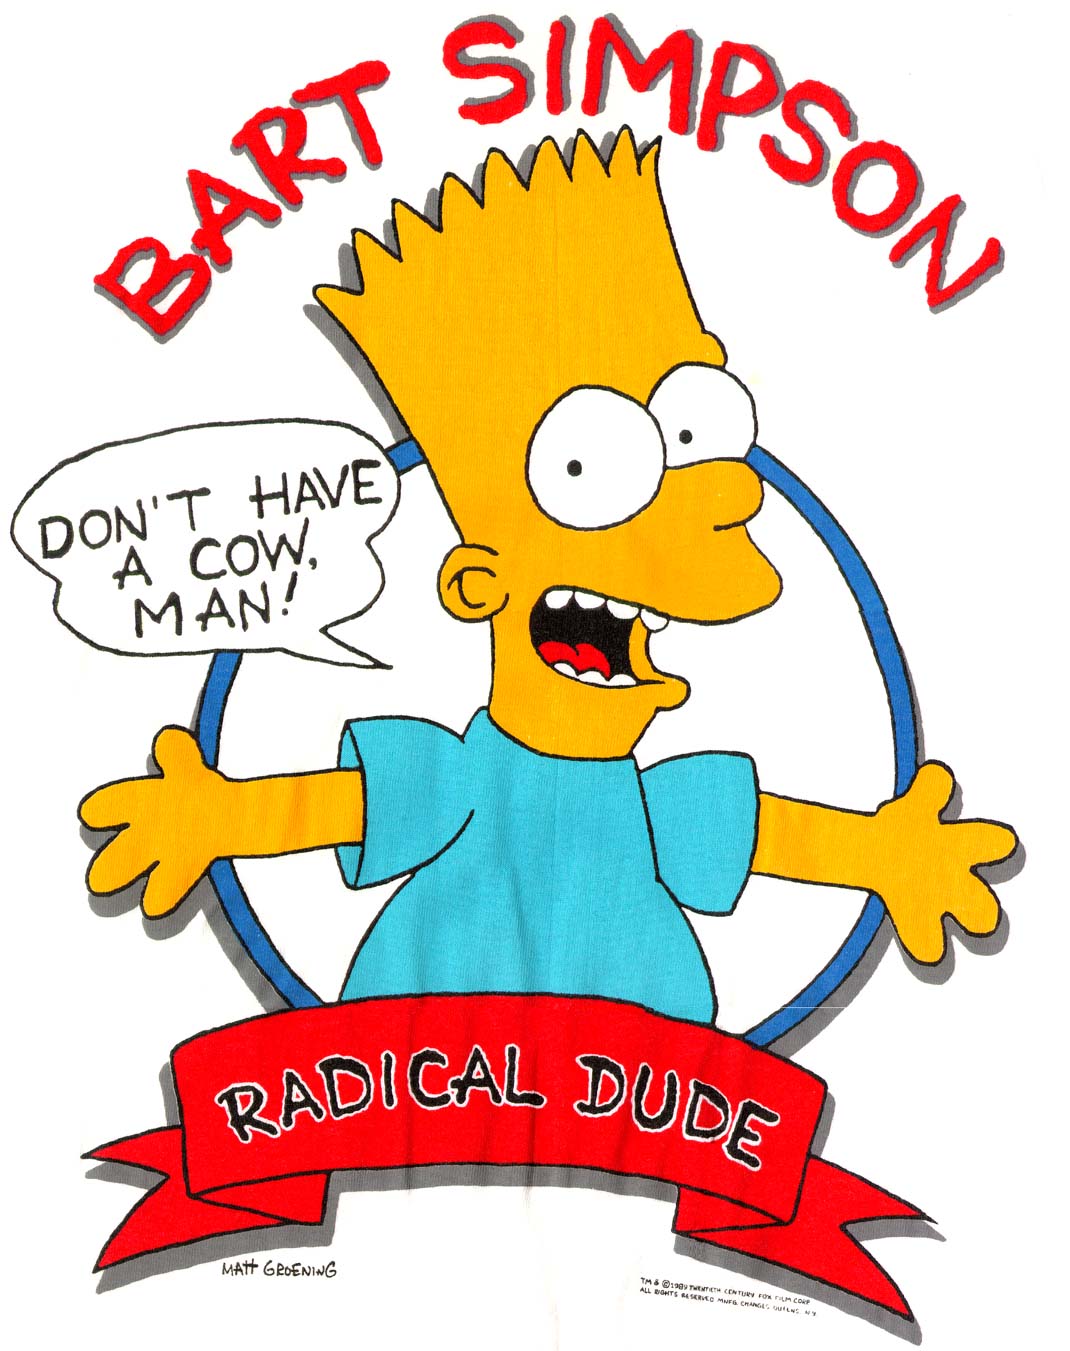 Study Says Bart Simpson Was Mistaken When He Said “Don’t Have A Cow, Man!”